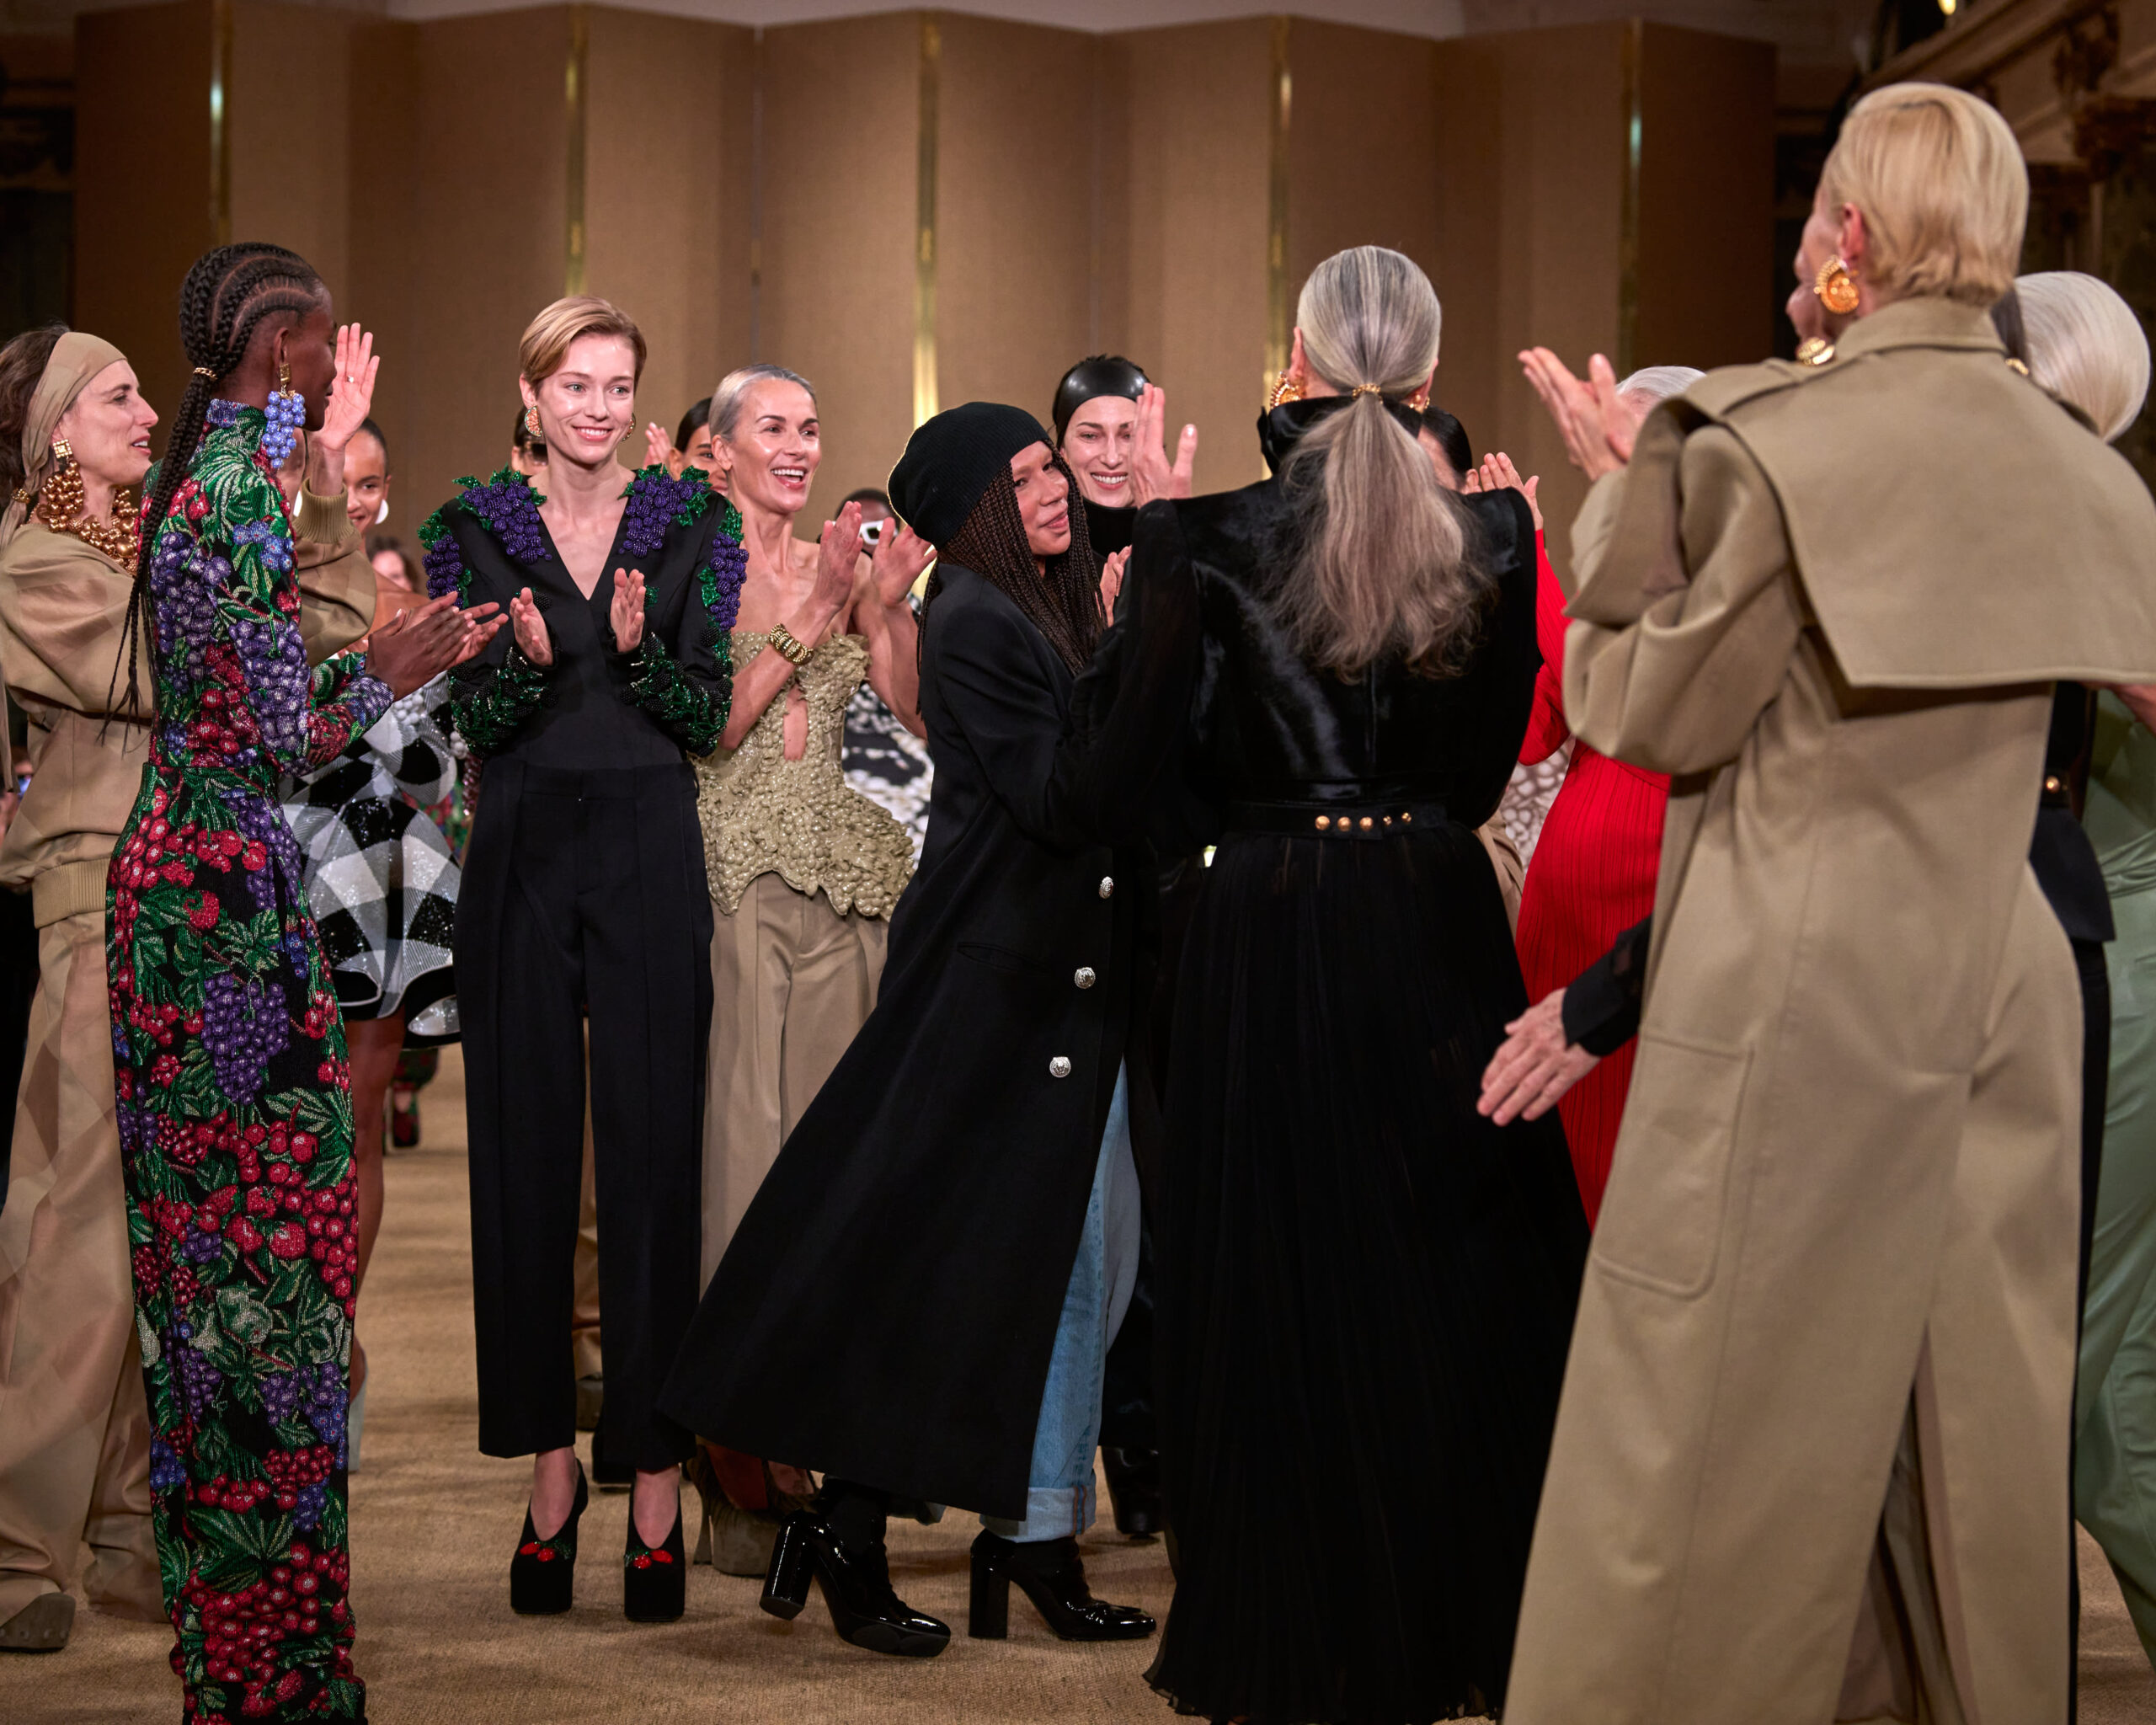 A group of people surround Olivier Rousteing, stand in an indoor setting, clapping and facing a central figure not fully visible in the image. They are stylishly dressed, with the foreground showing various high-fashion garments, like a floral jumpsuit, a black tailored suit, and an embellished green top paired with a black pleated skirt.